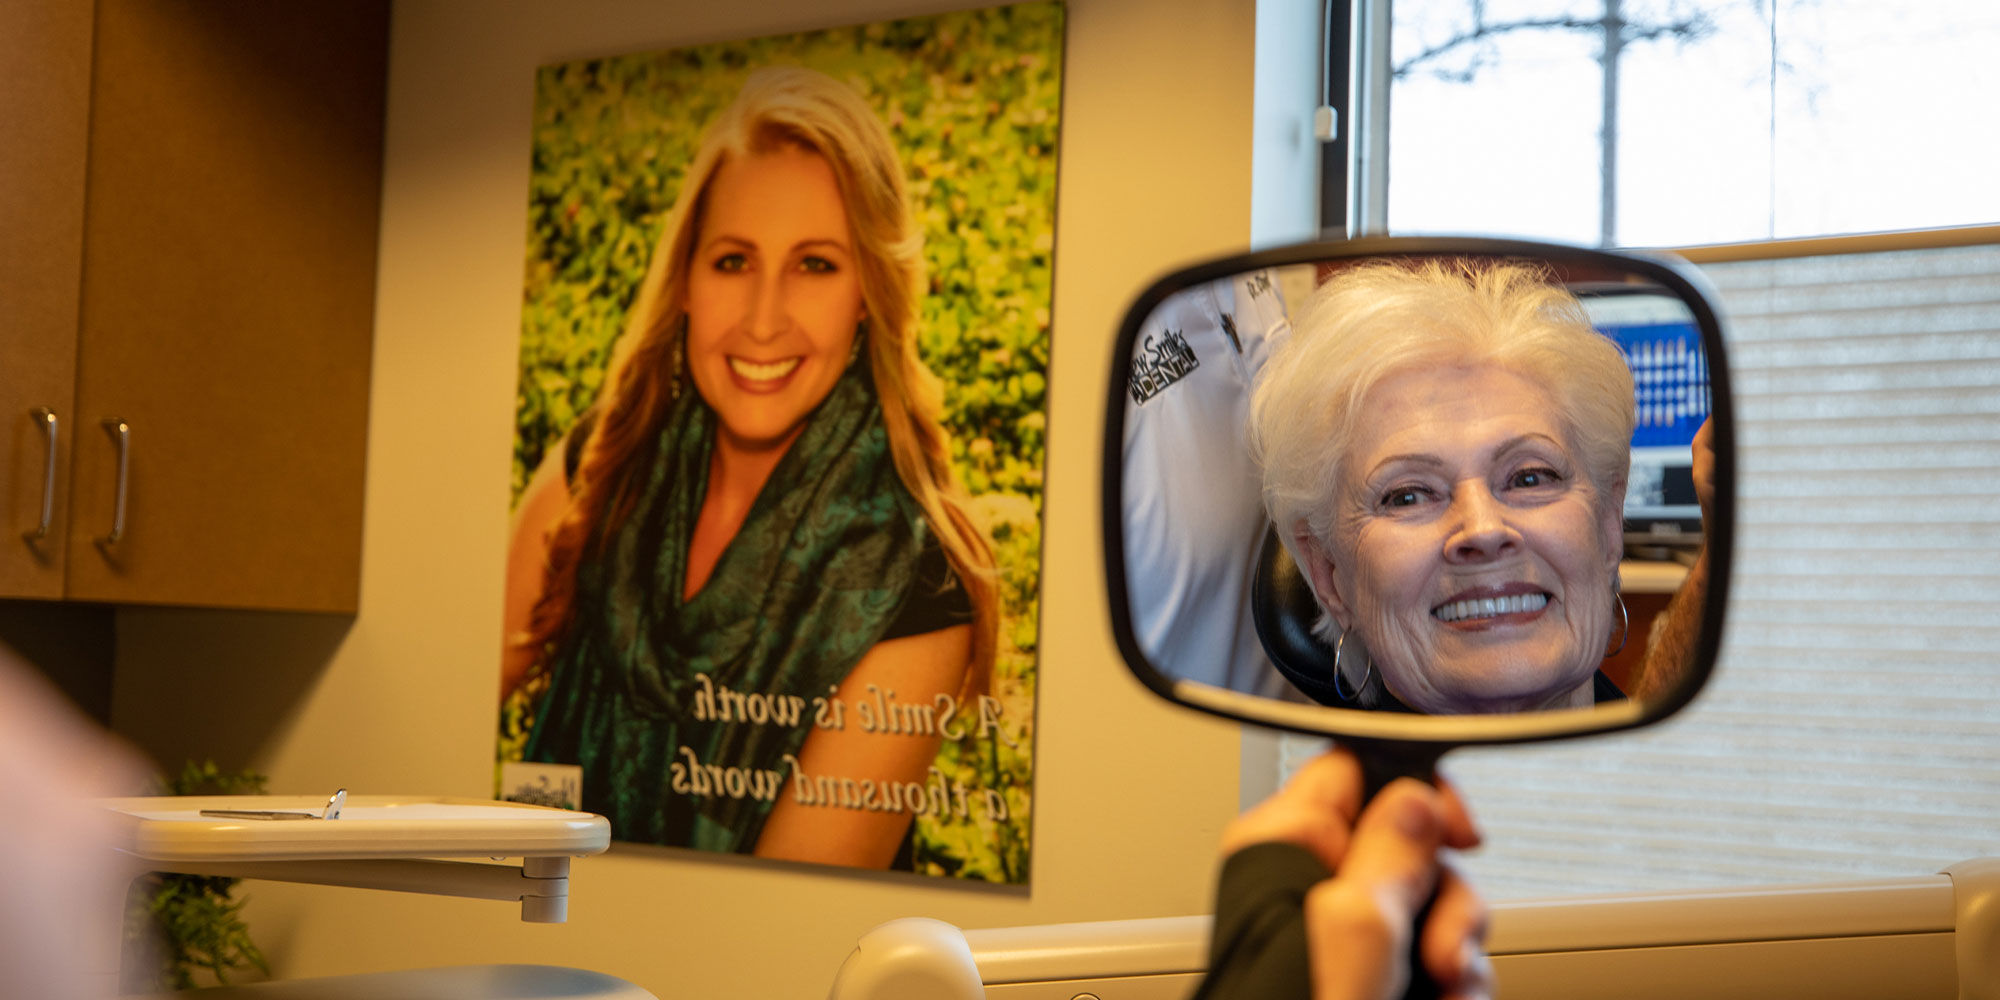 Patient smiling glamorously after their dental procedure